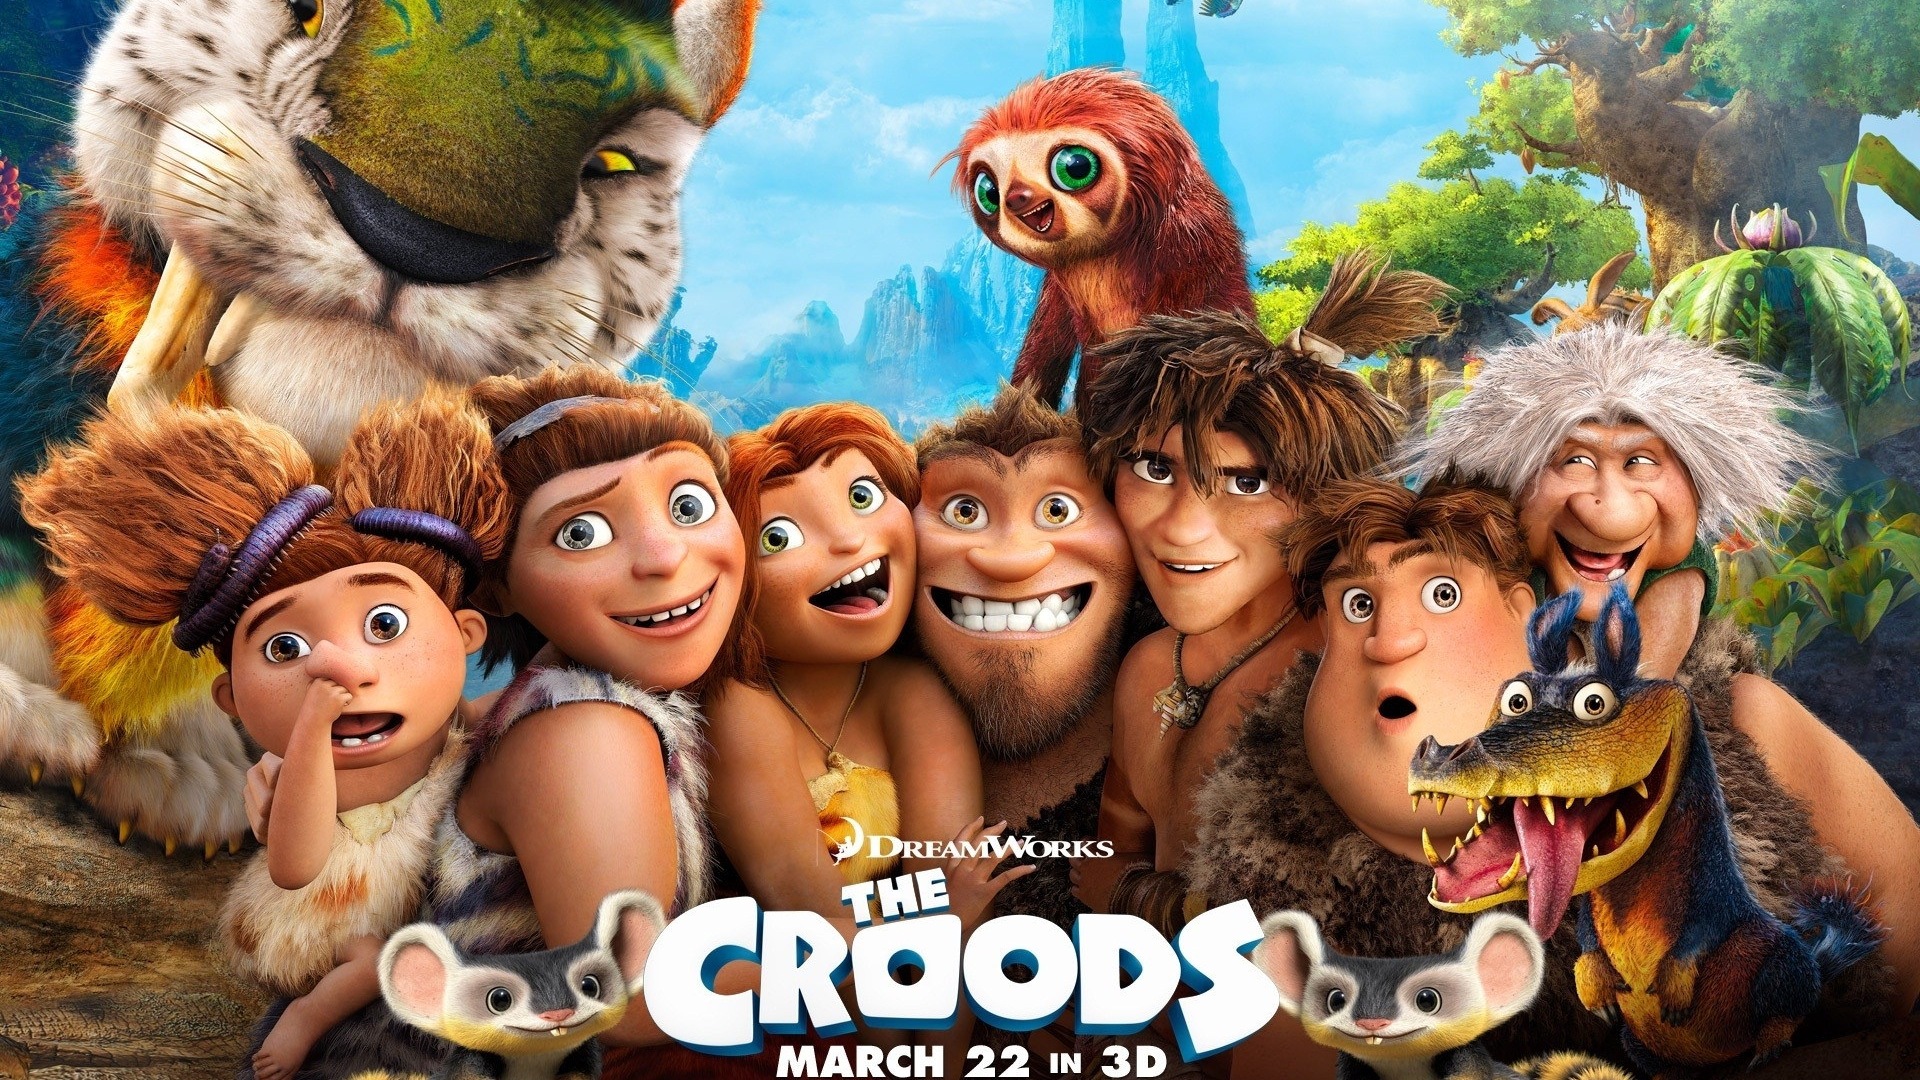 V Croods HD Movie Wallpapers #1 - 1920x1080